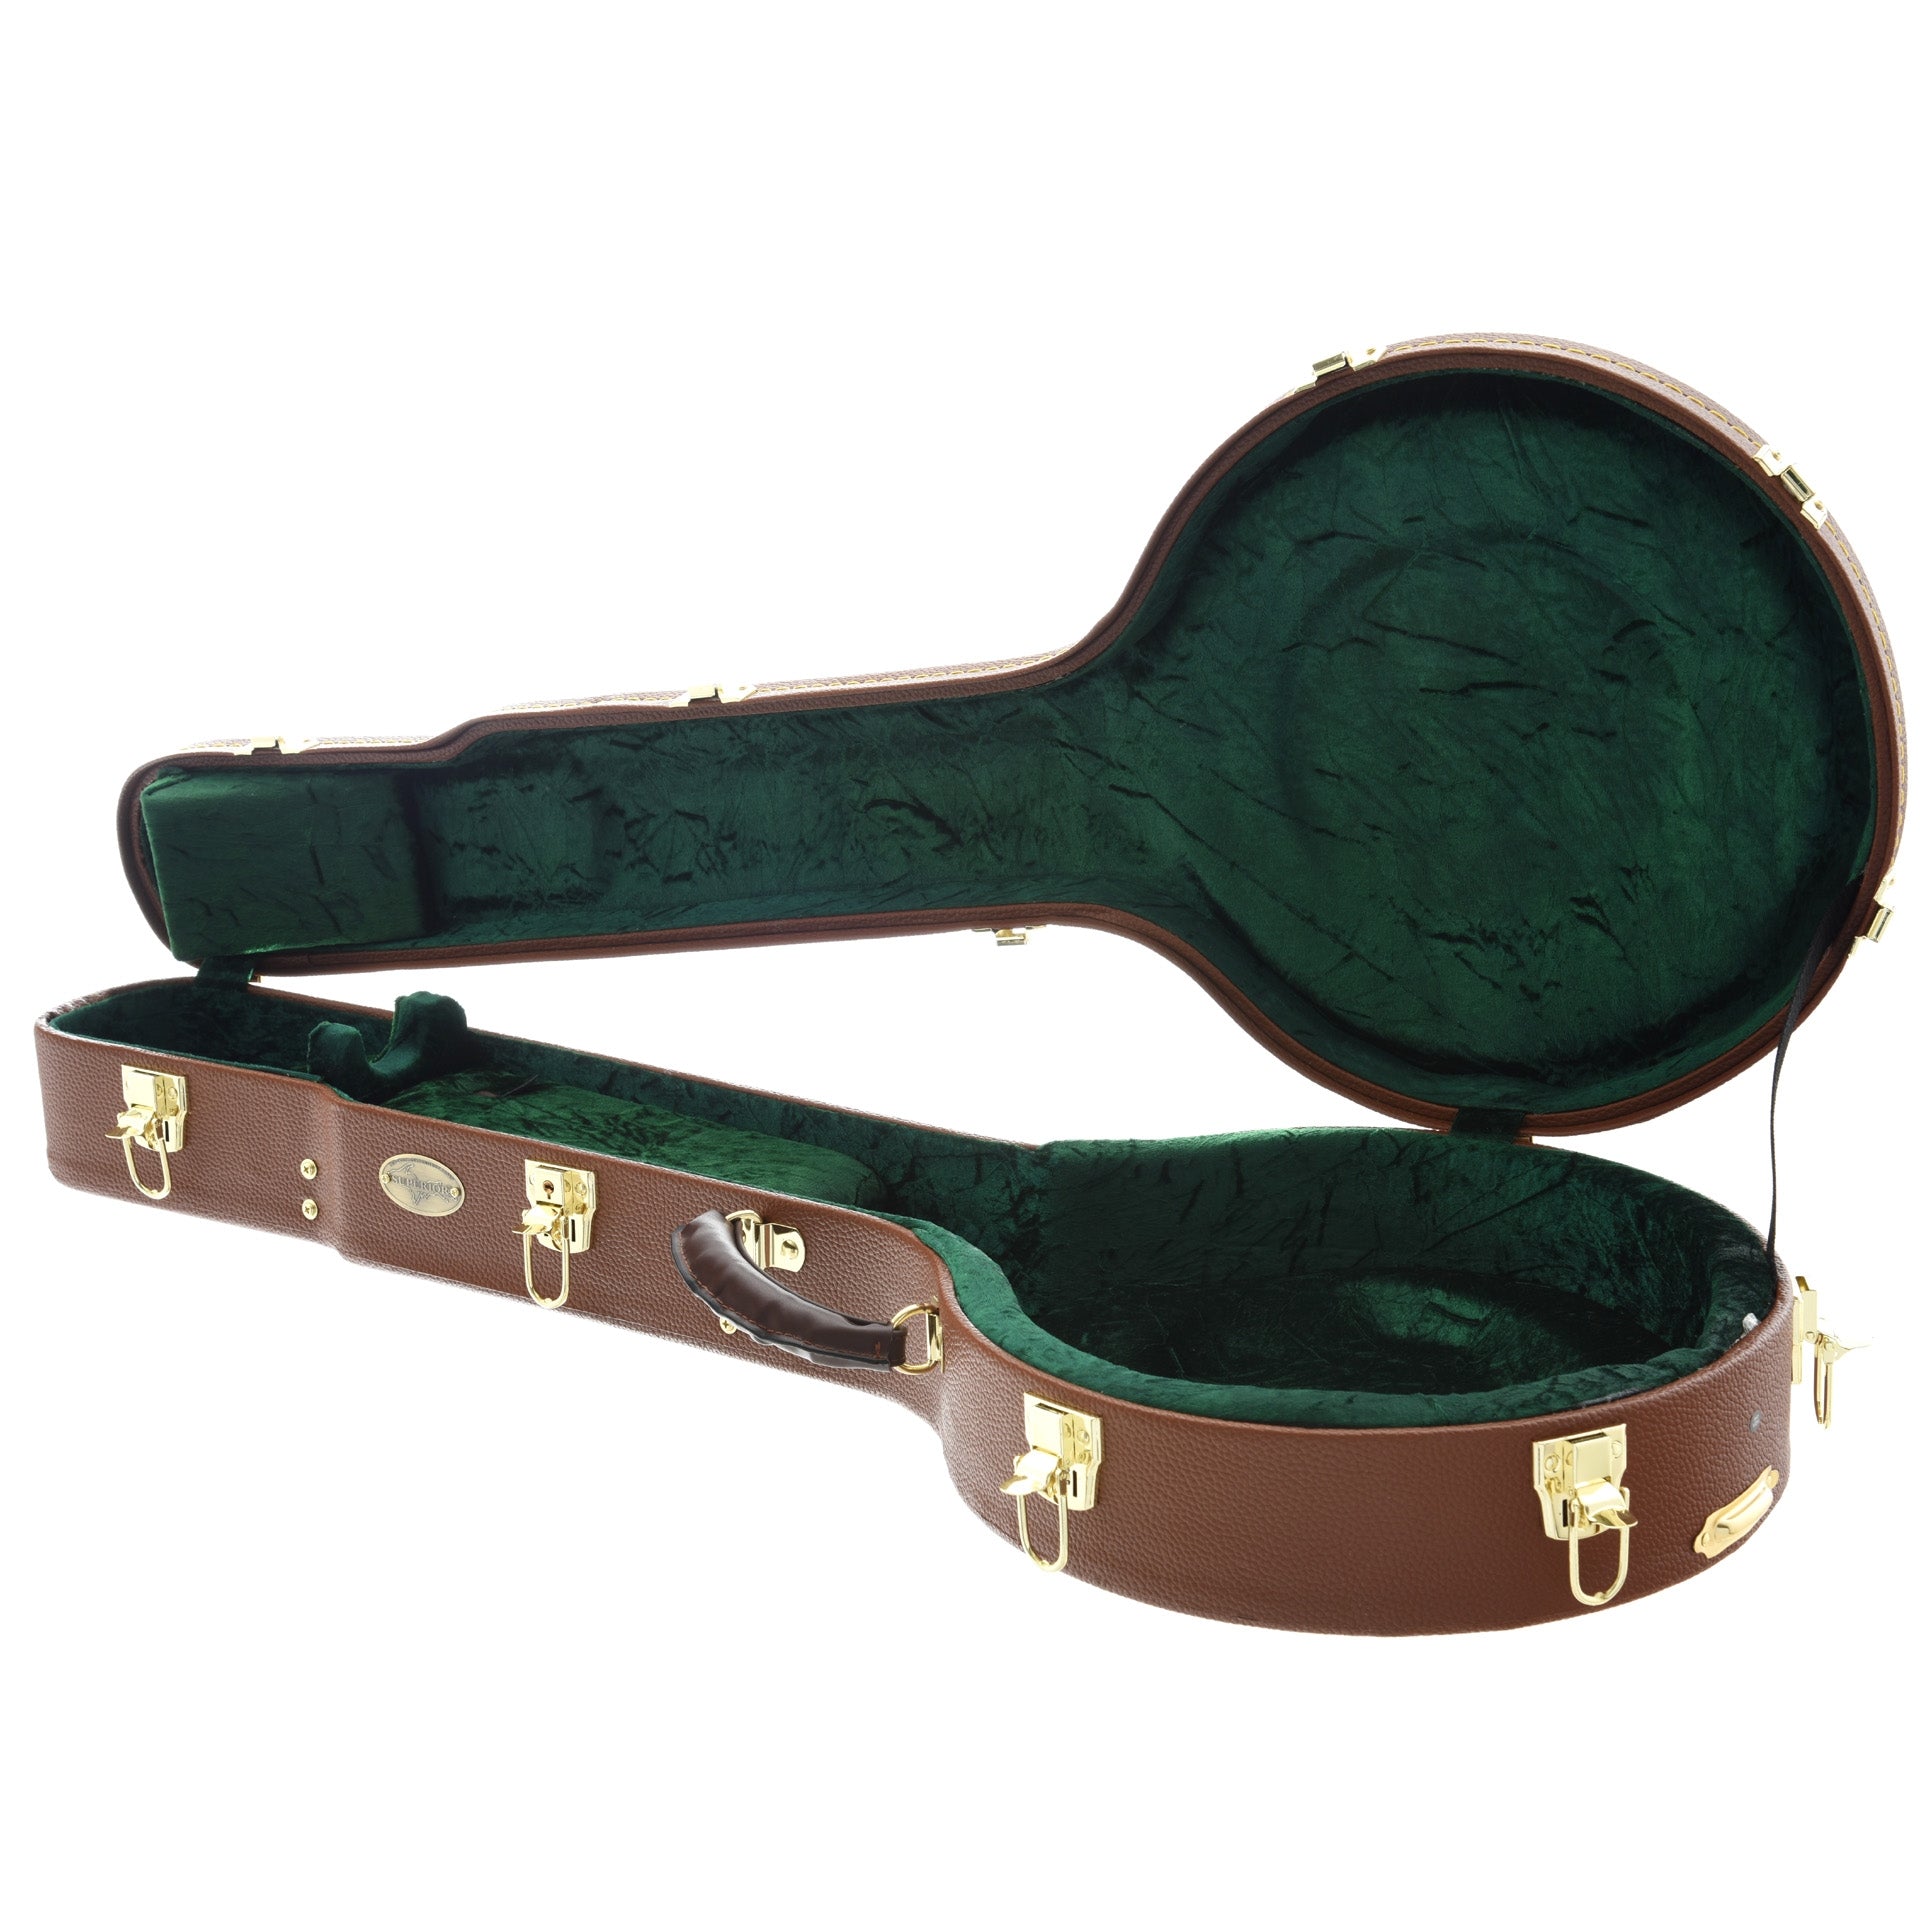 Full Inside and Side of Superior, B-Stock, Deluxe "Bump-Style" 12" Openback Banjo Case